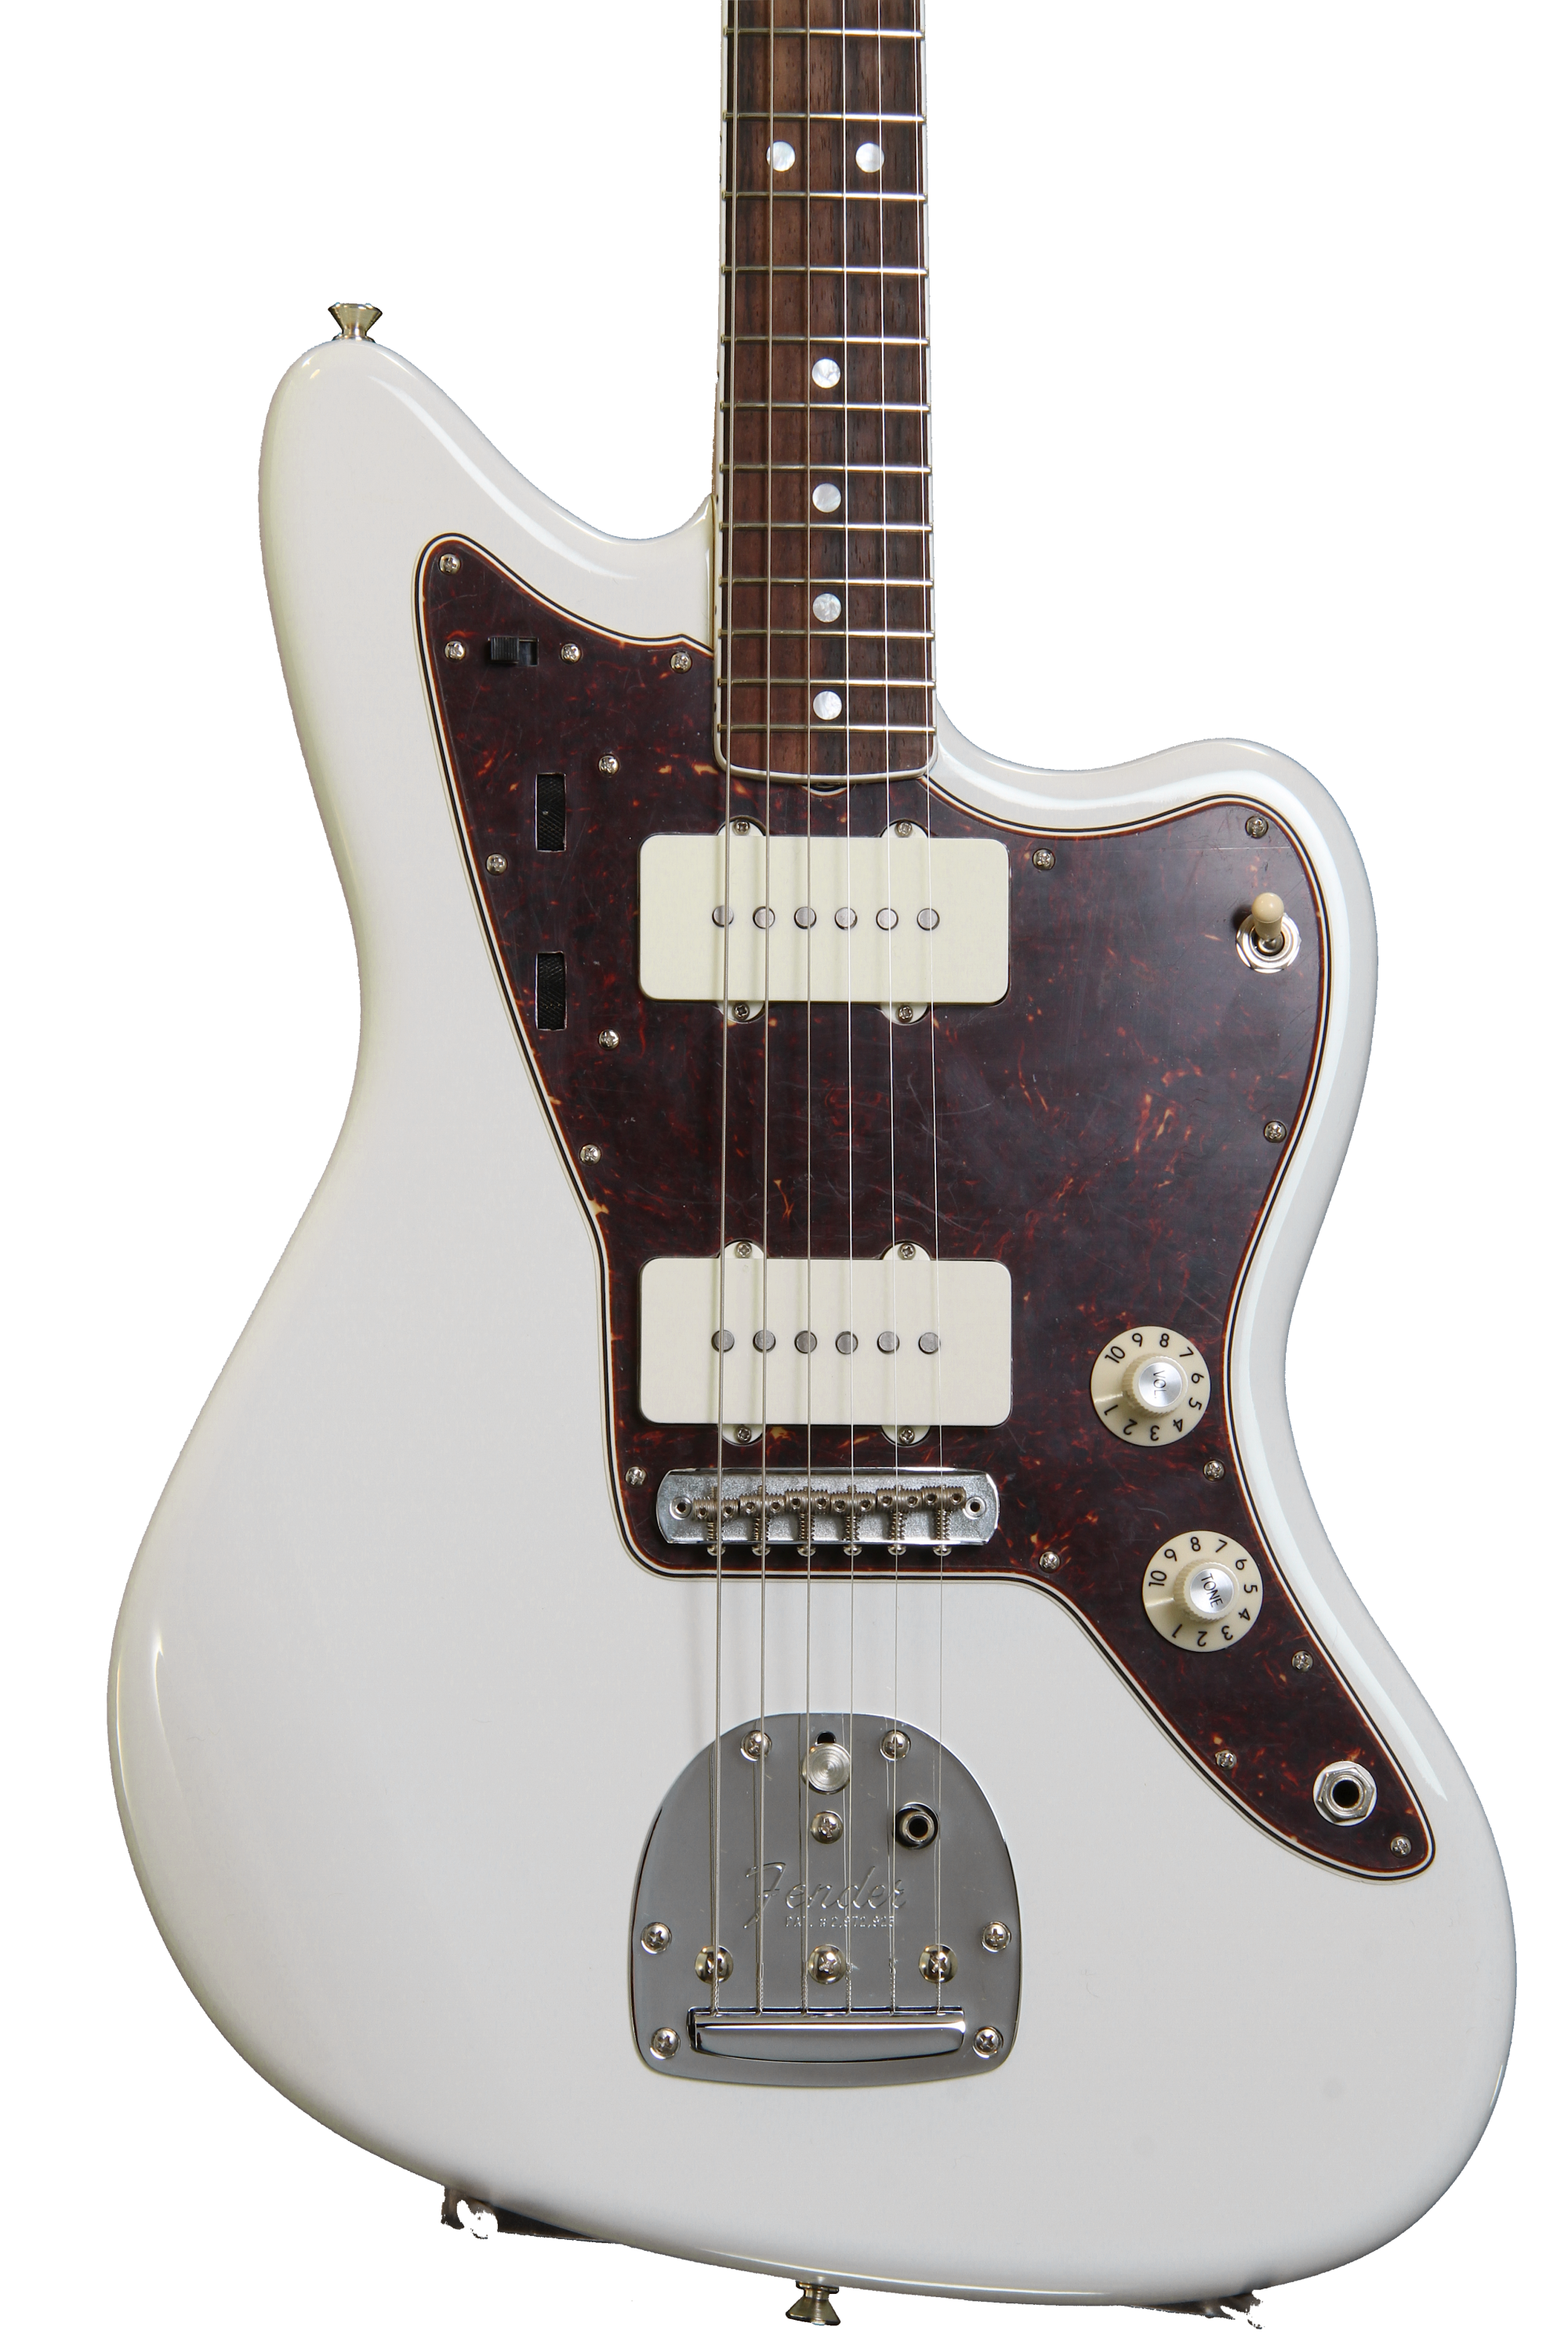 Fender American Vintage '65 Jazzmaster - Olympic White with 